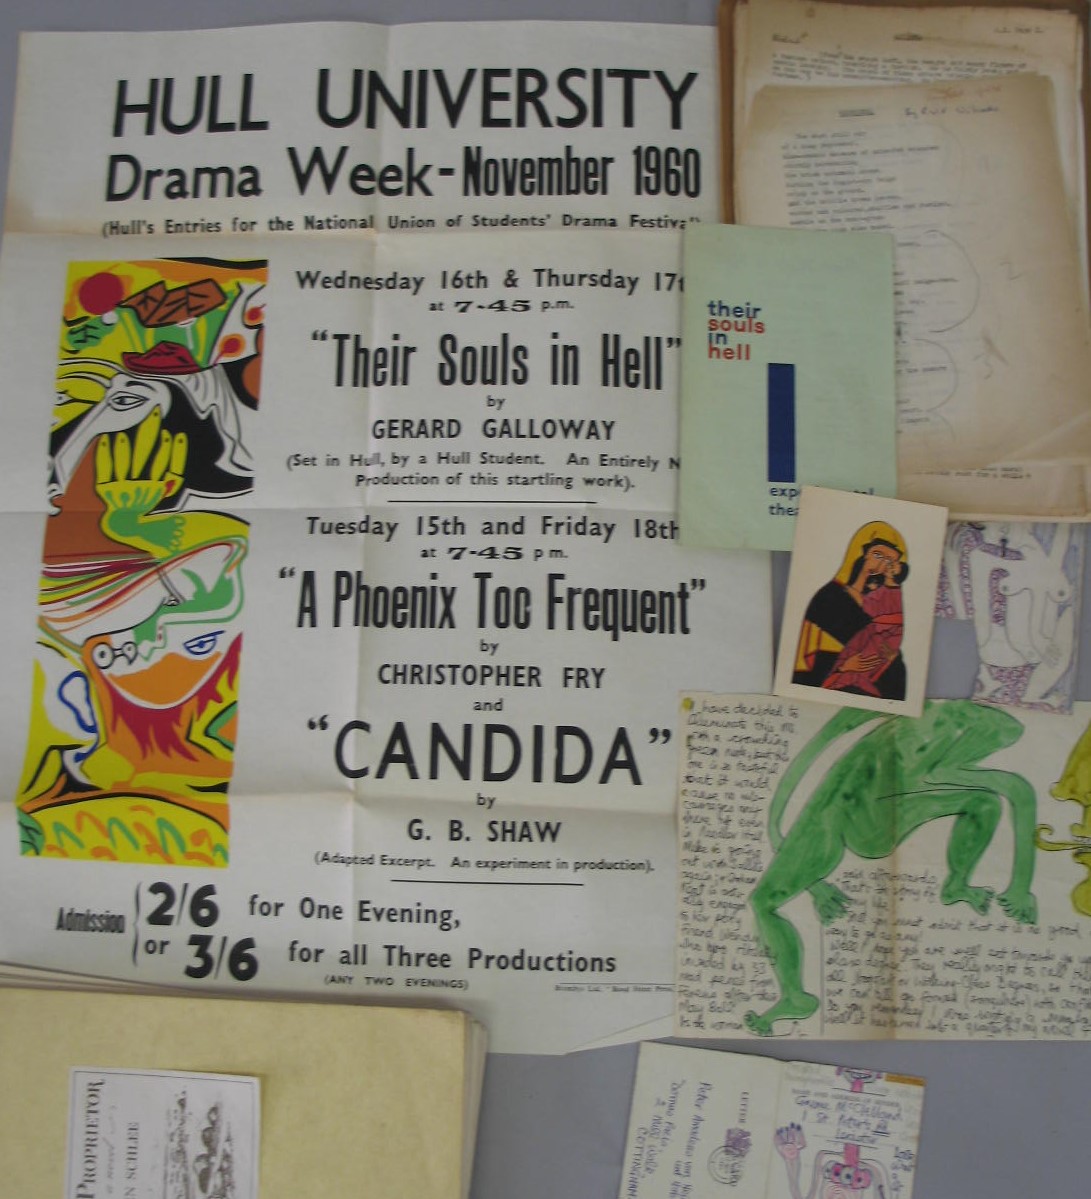 HULL UNIVERSITY POSTER ca. 1960, for "Their Souls in Hell", by Gerard Galloway, typescript of the